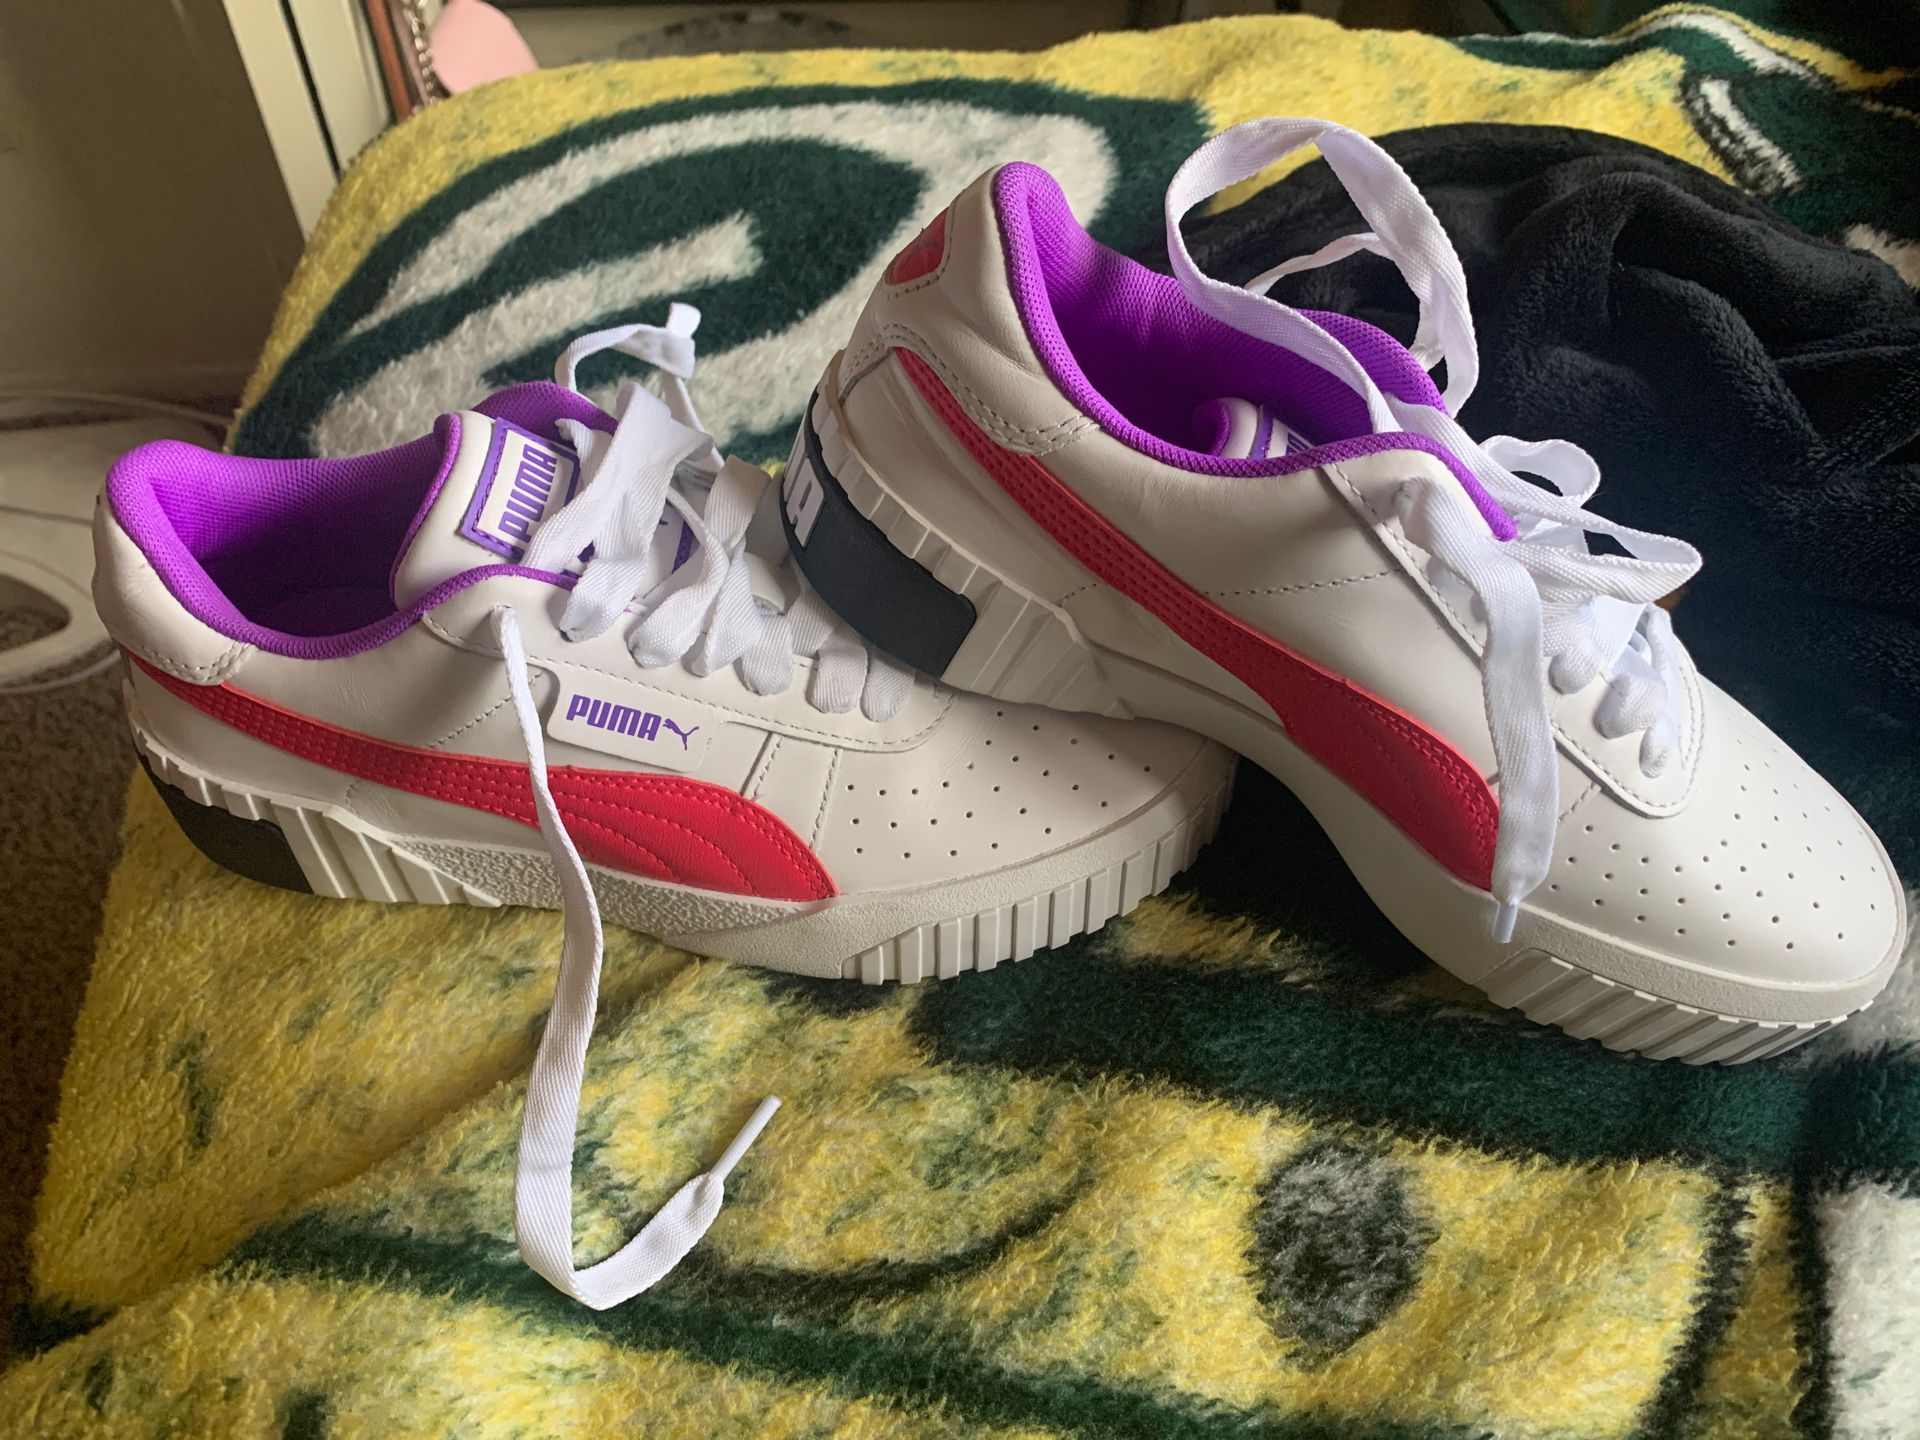 2 Pairs of Woman’s Puma’s size 7 &10